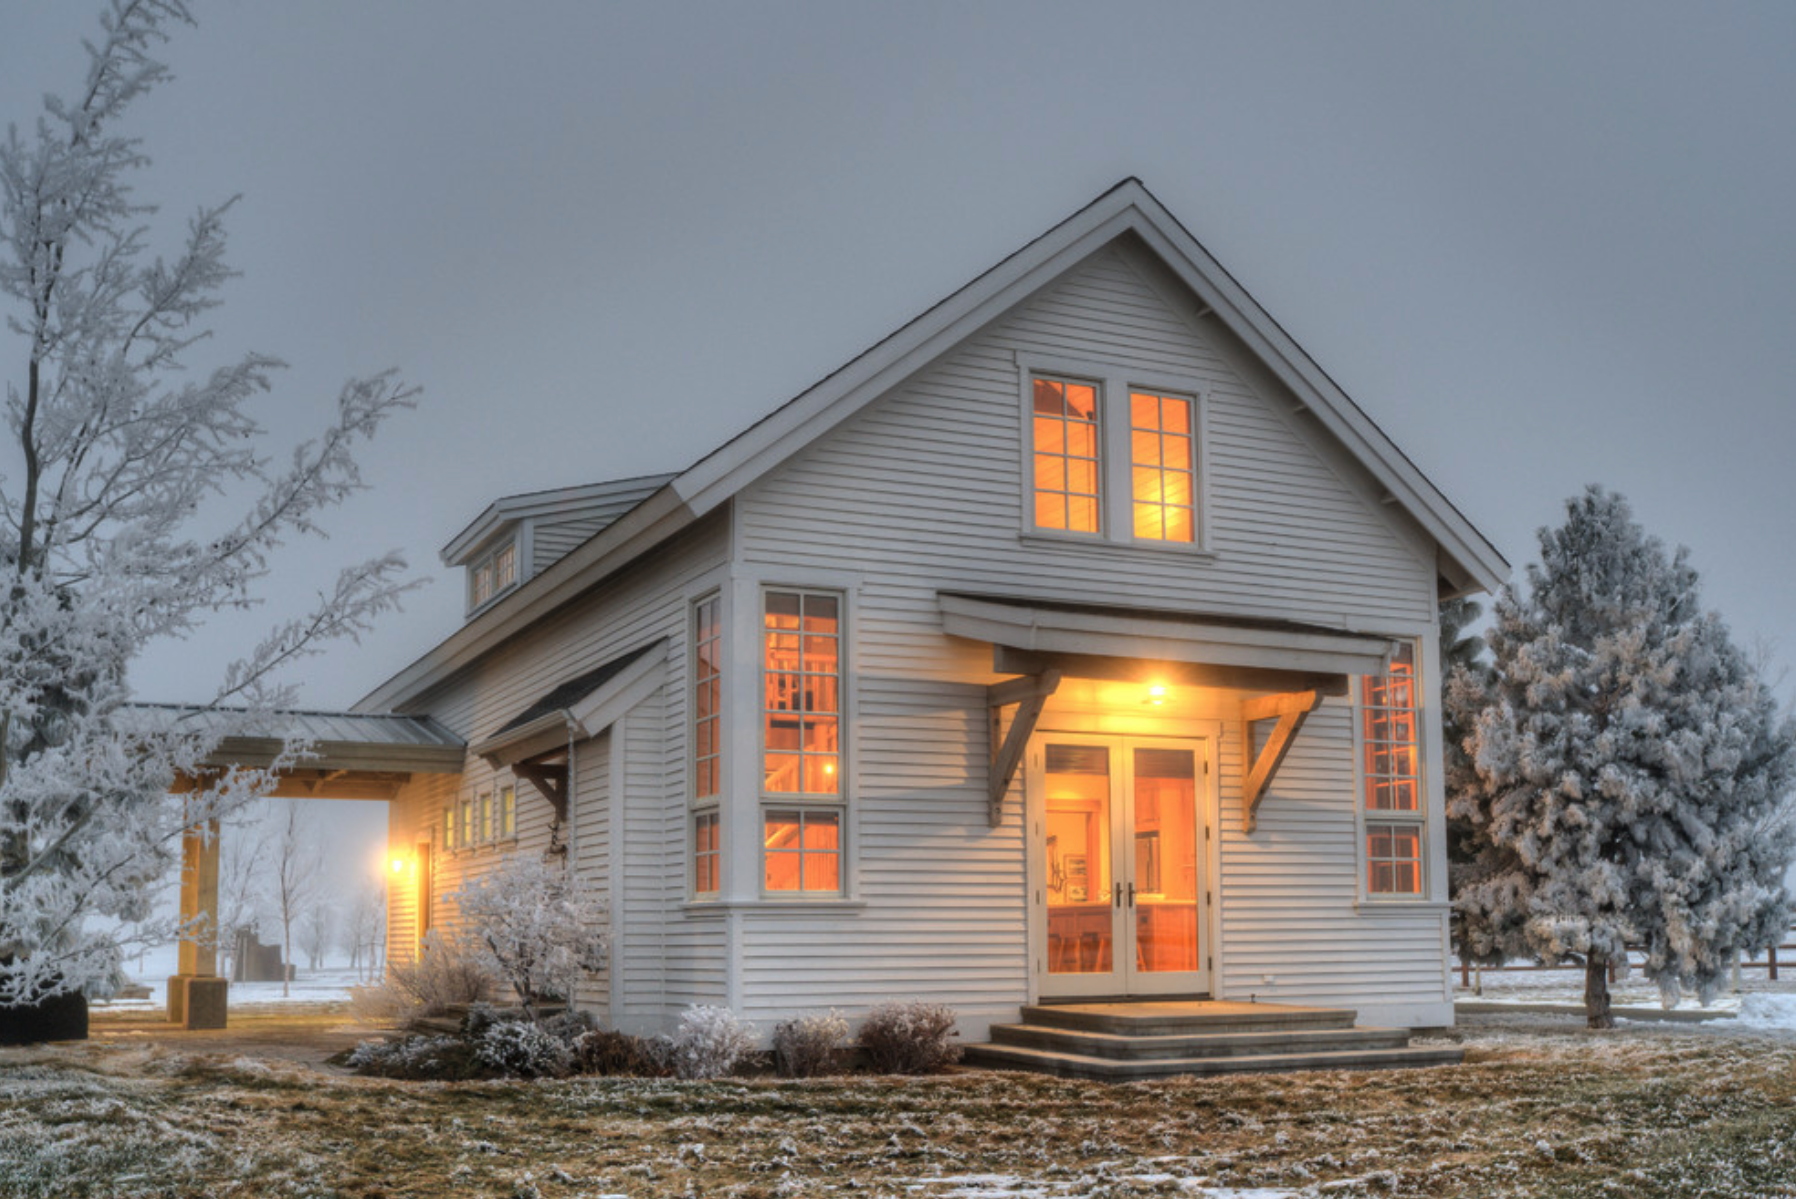 Exterior inspiration for the ATG&D Dream Home new home construction in Cambridge, WI. | All Things G&D